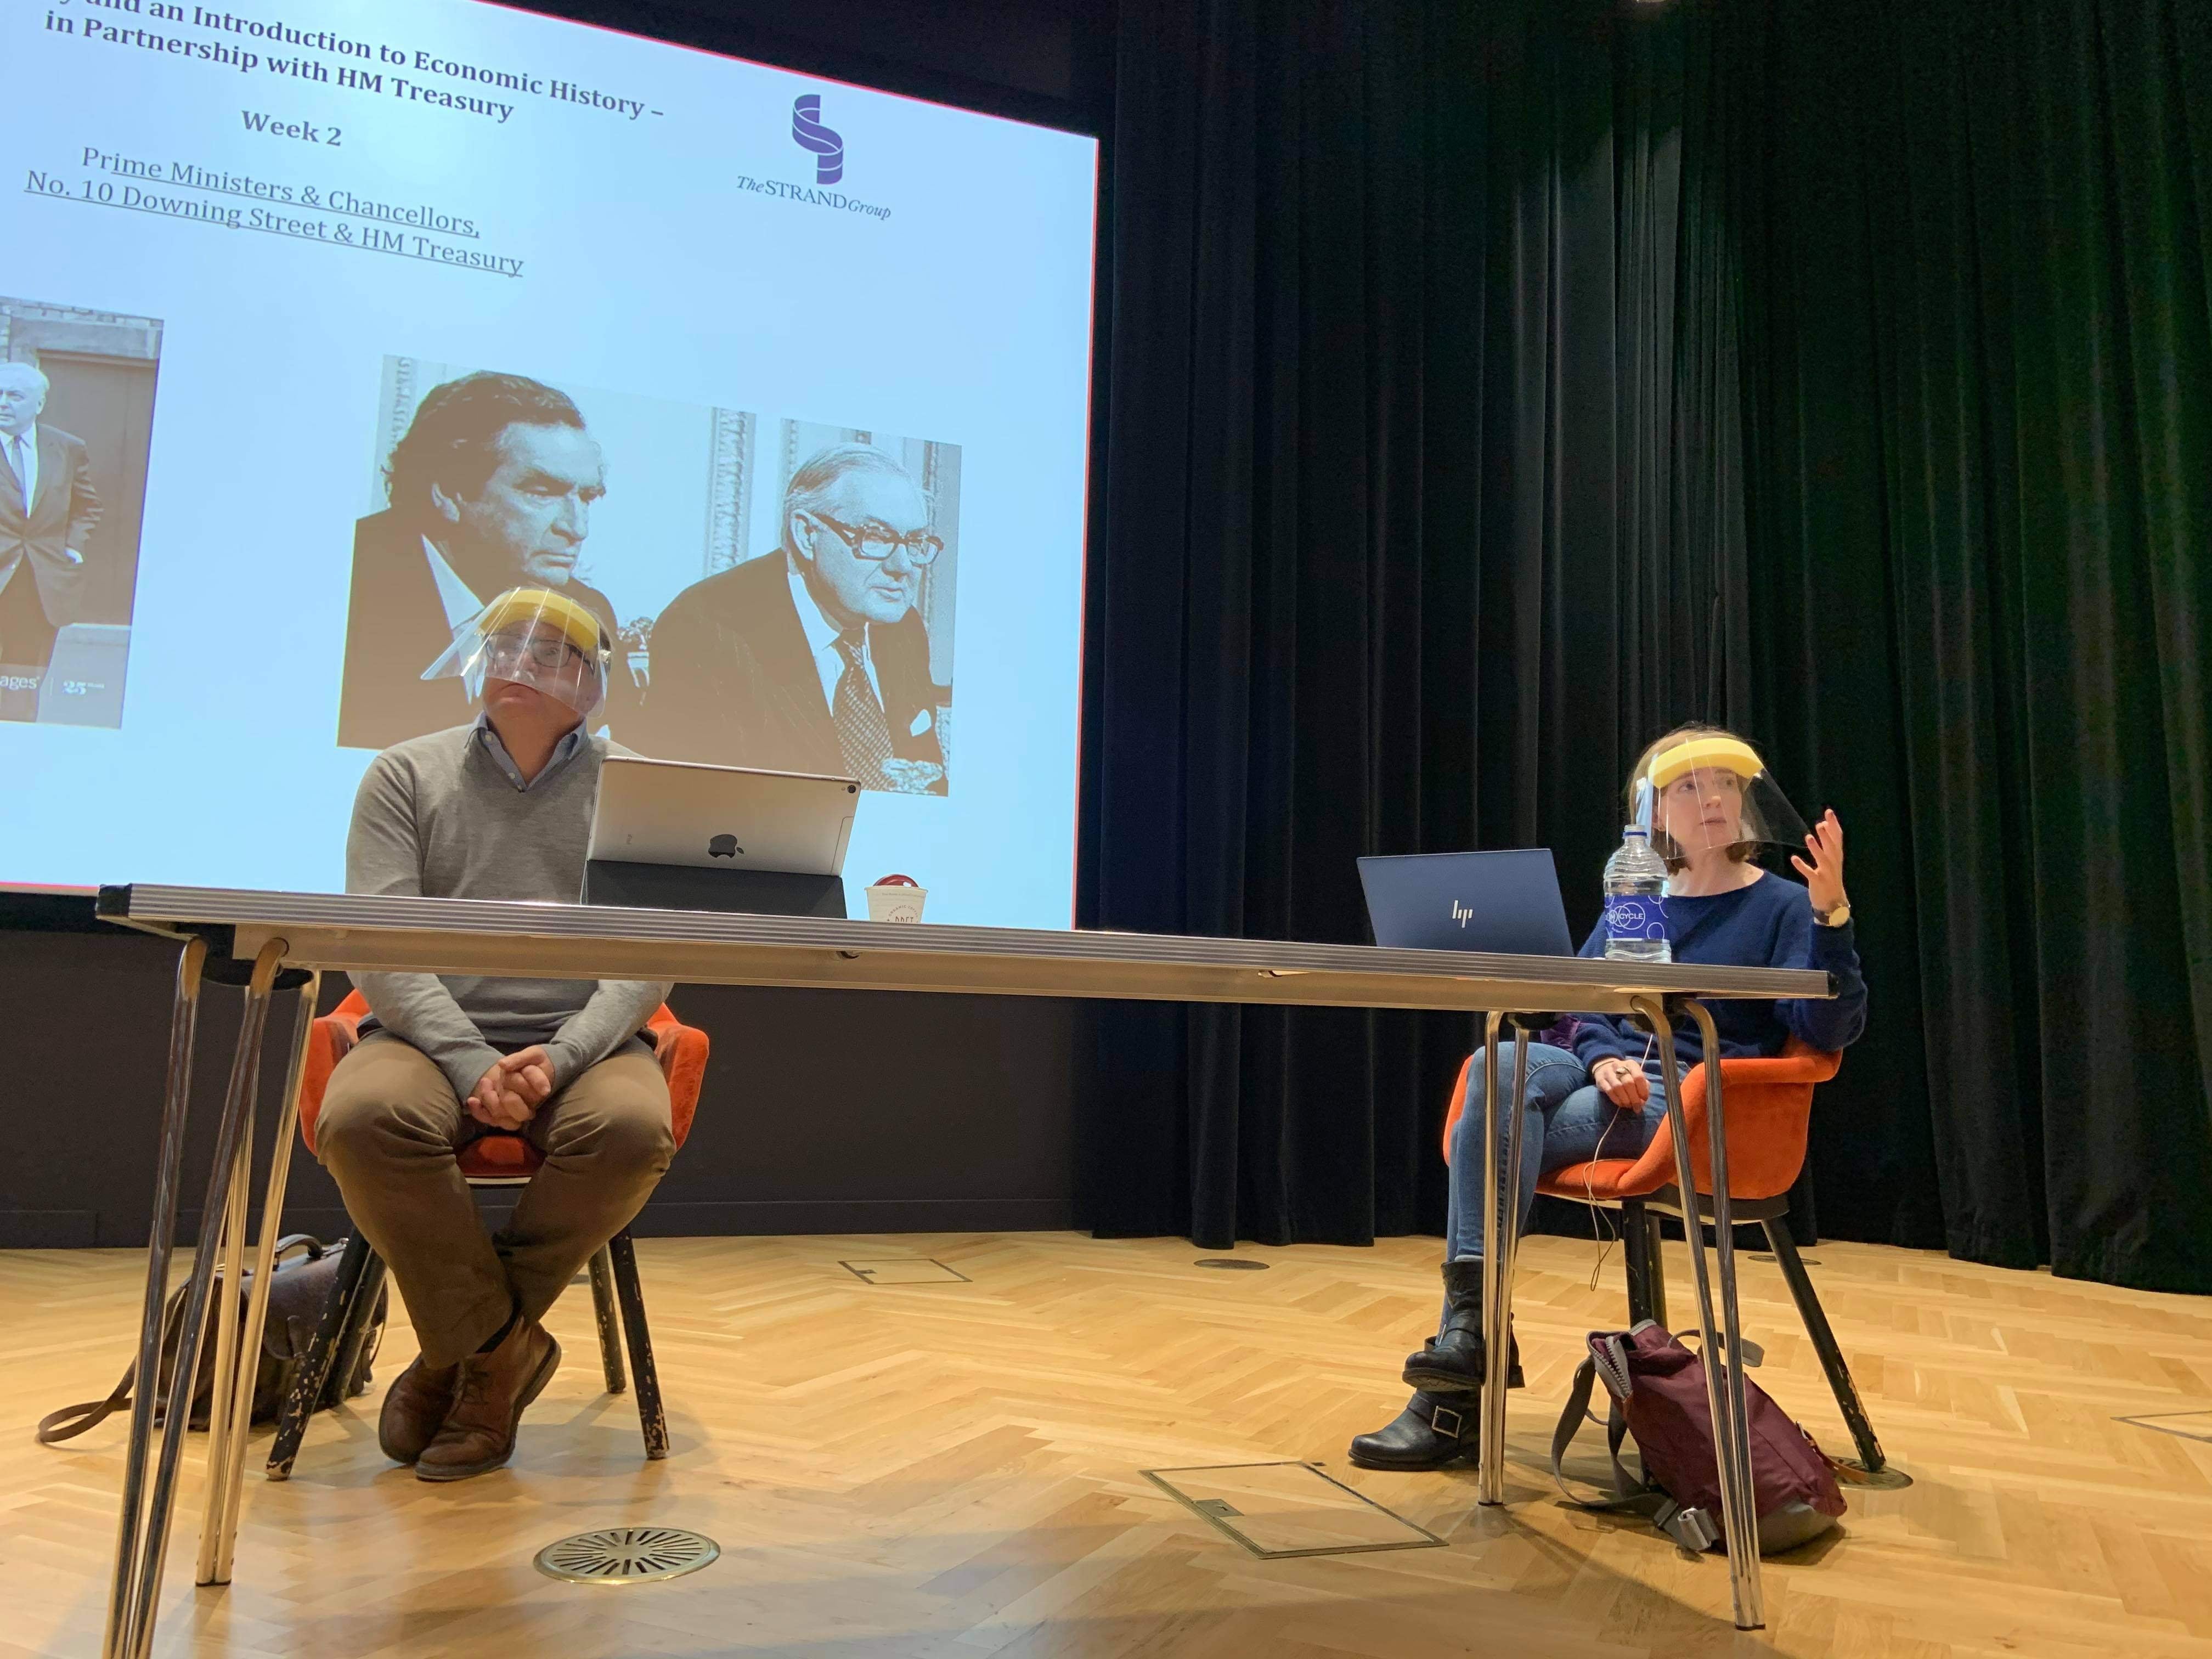 <p>Ed Balls, who has just been promoted to professor at King’s College London, joins Clare Lombardelli during a lecture on the economic history course</p>